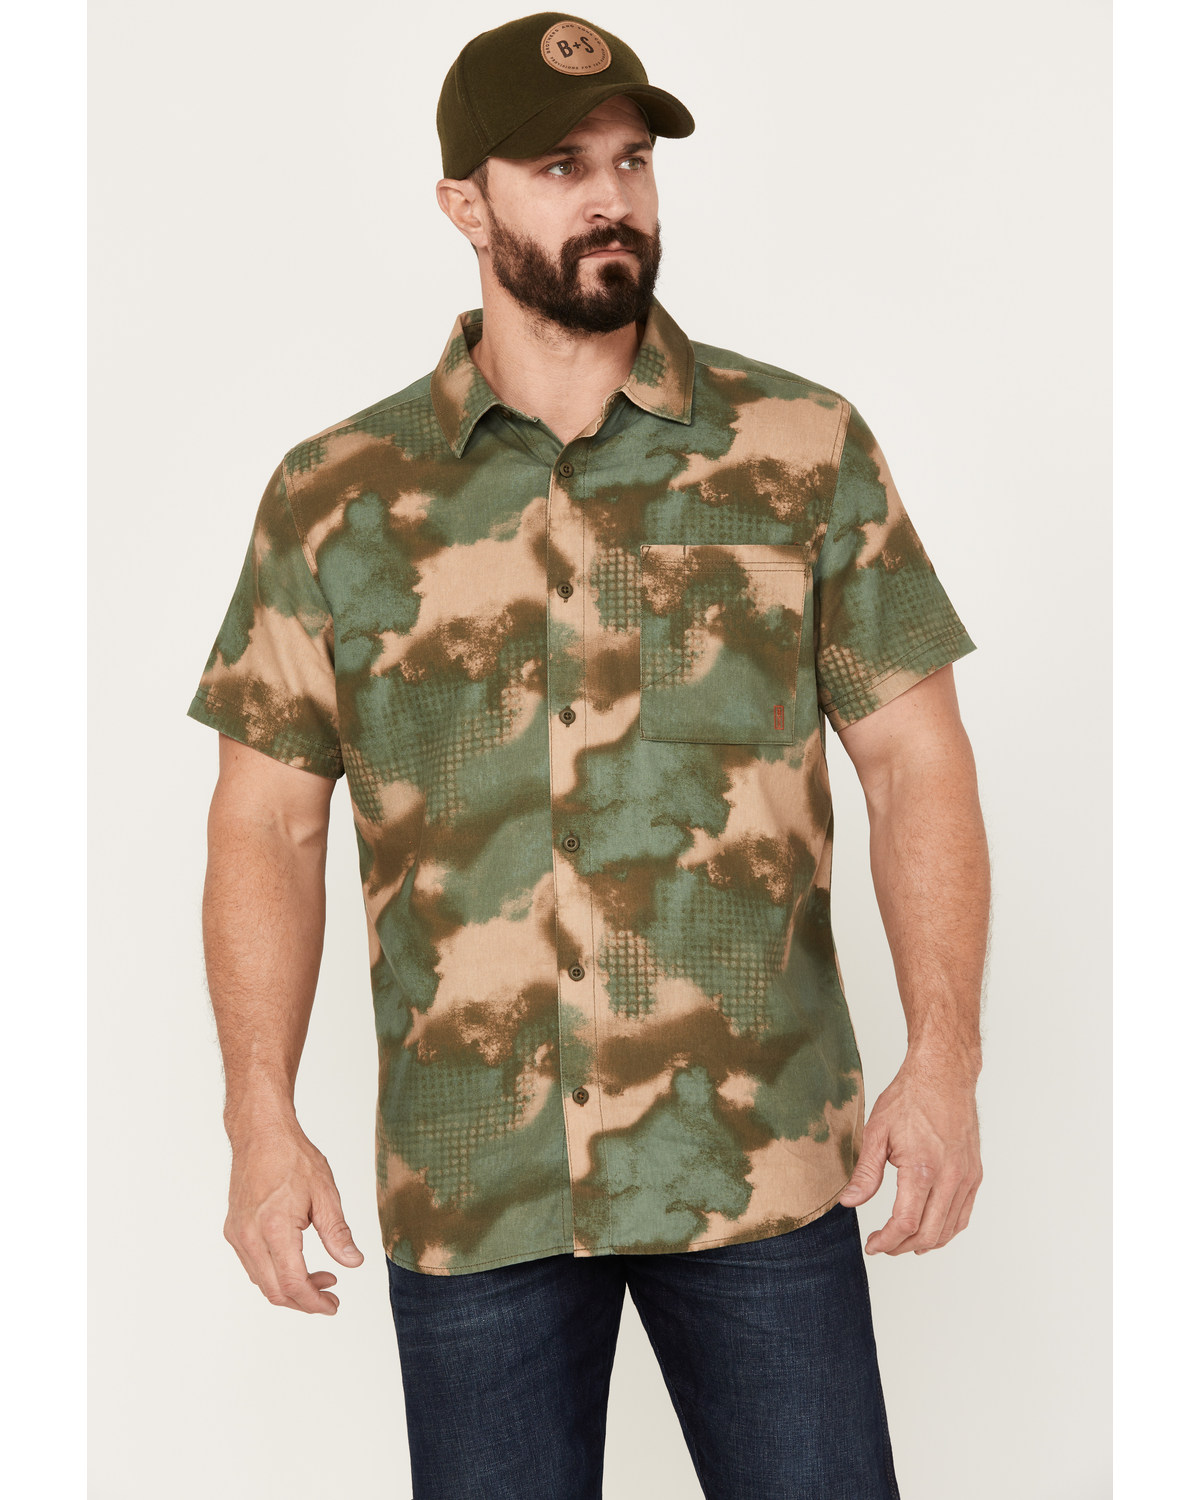 Brothers and Sons Men's Hemp Camo Print Short Sleeve Button-Down Western Shirt